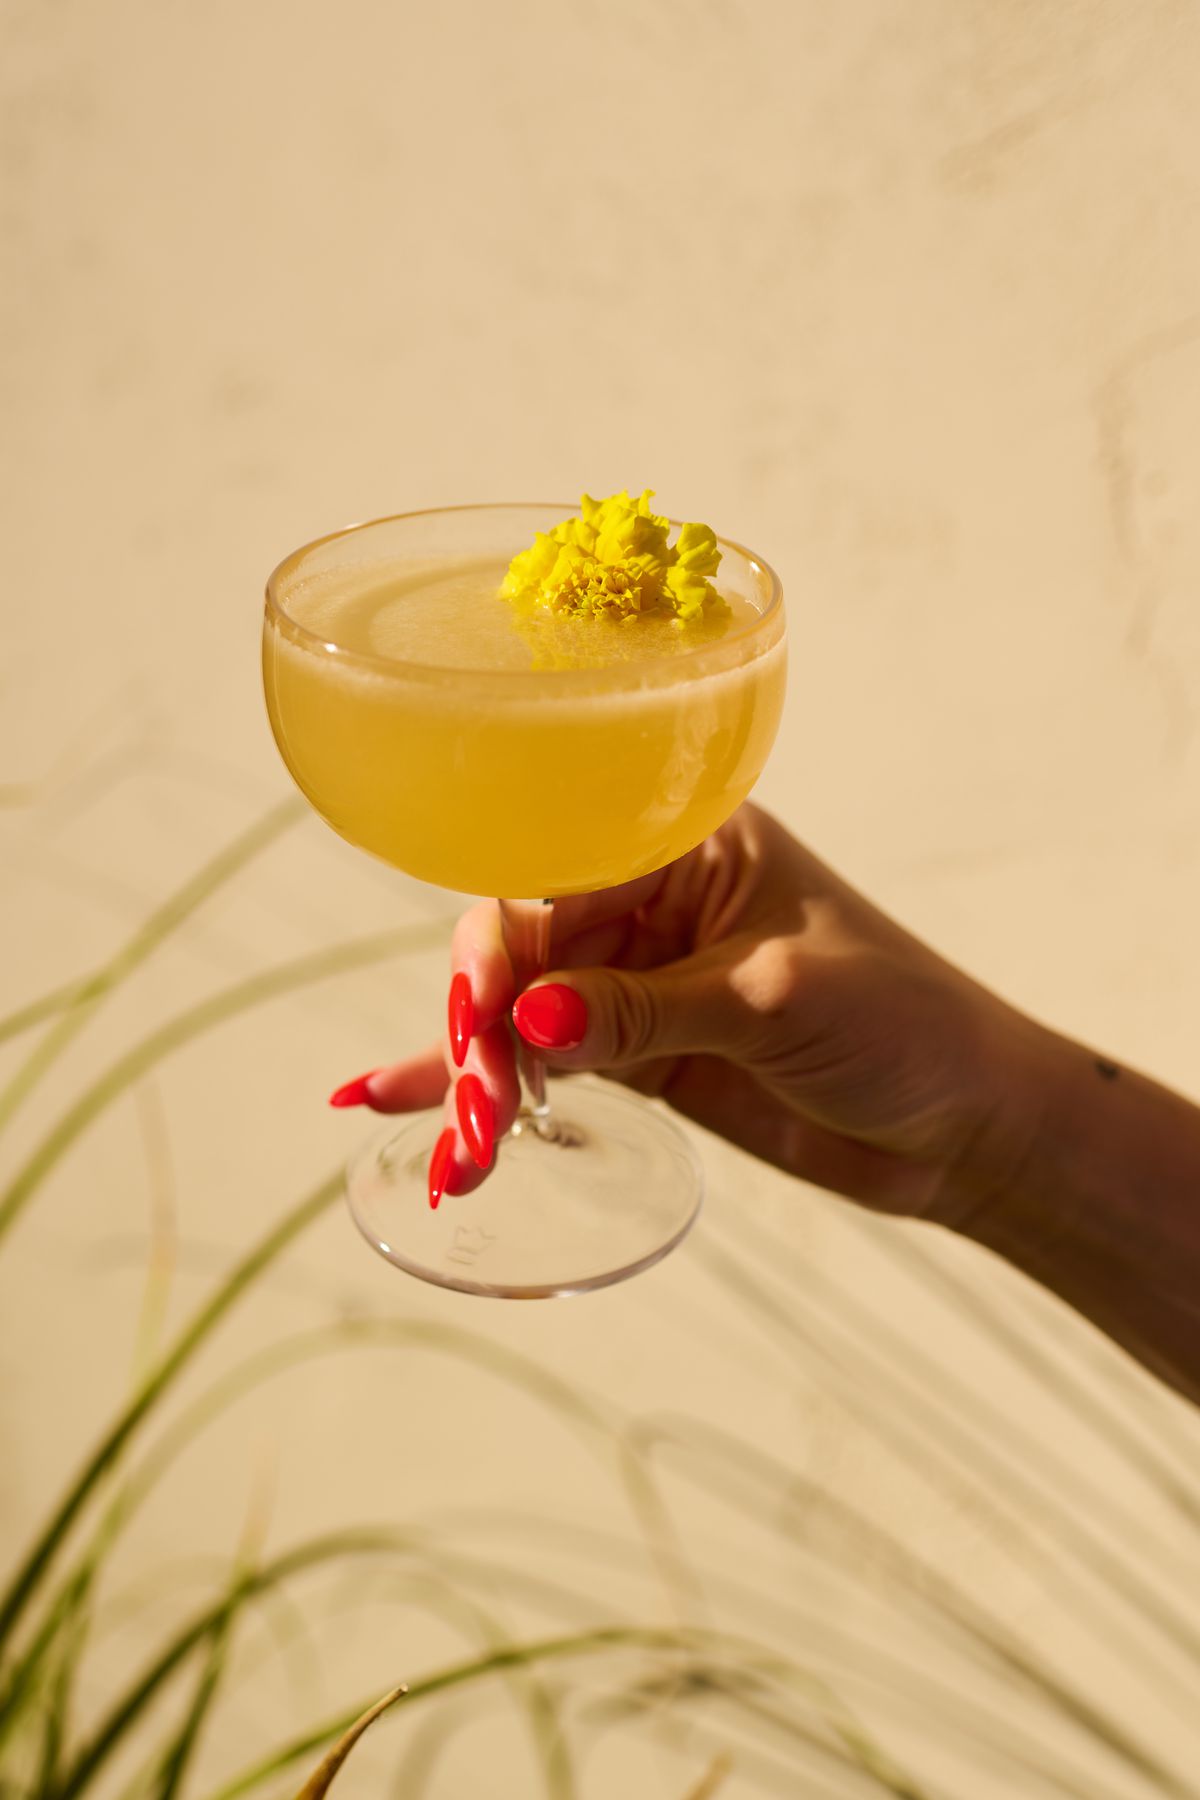 A yellow cocktail in a champagne glass garnished with an edible flower.